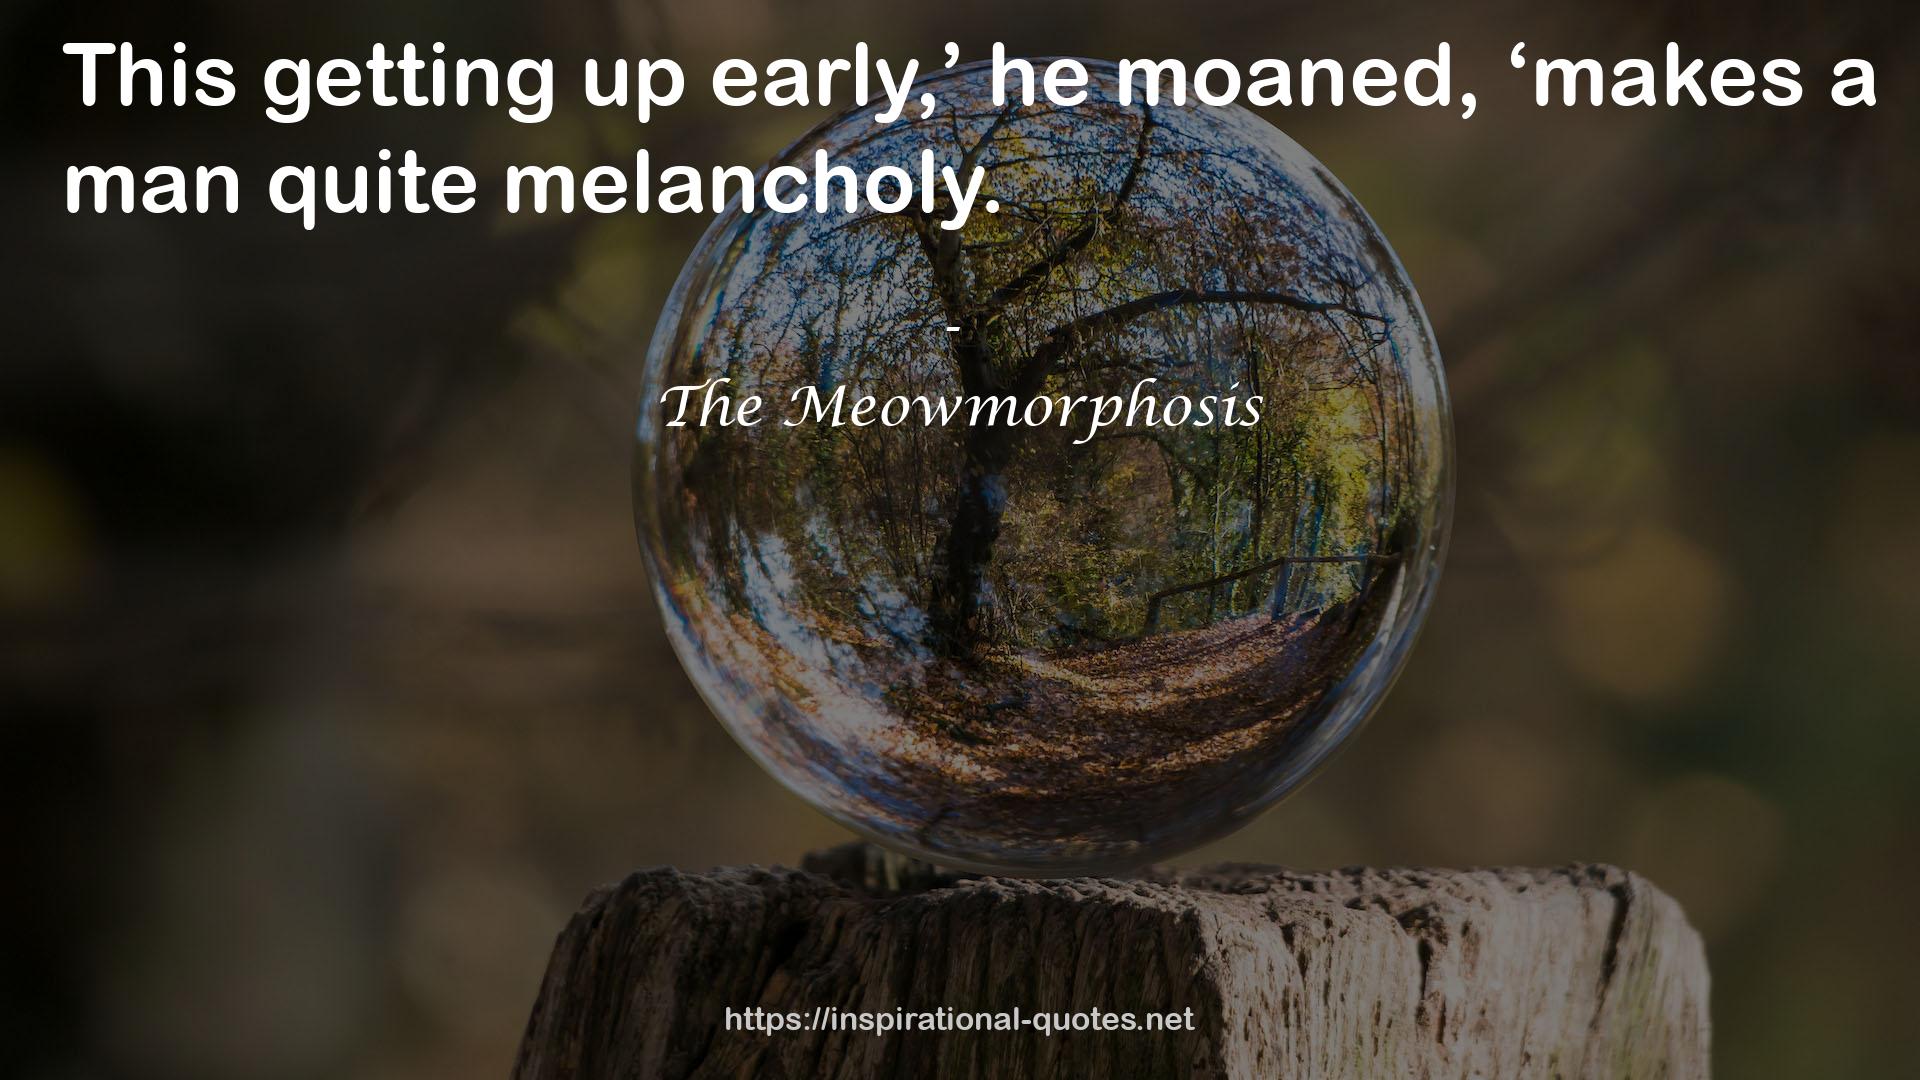 The Meowmorphosis QUOTES